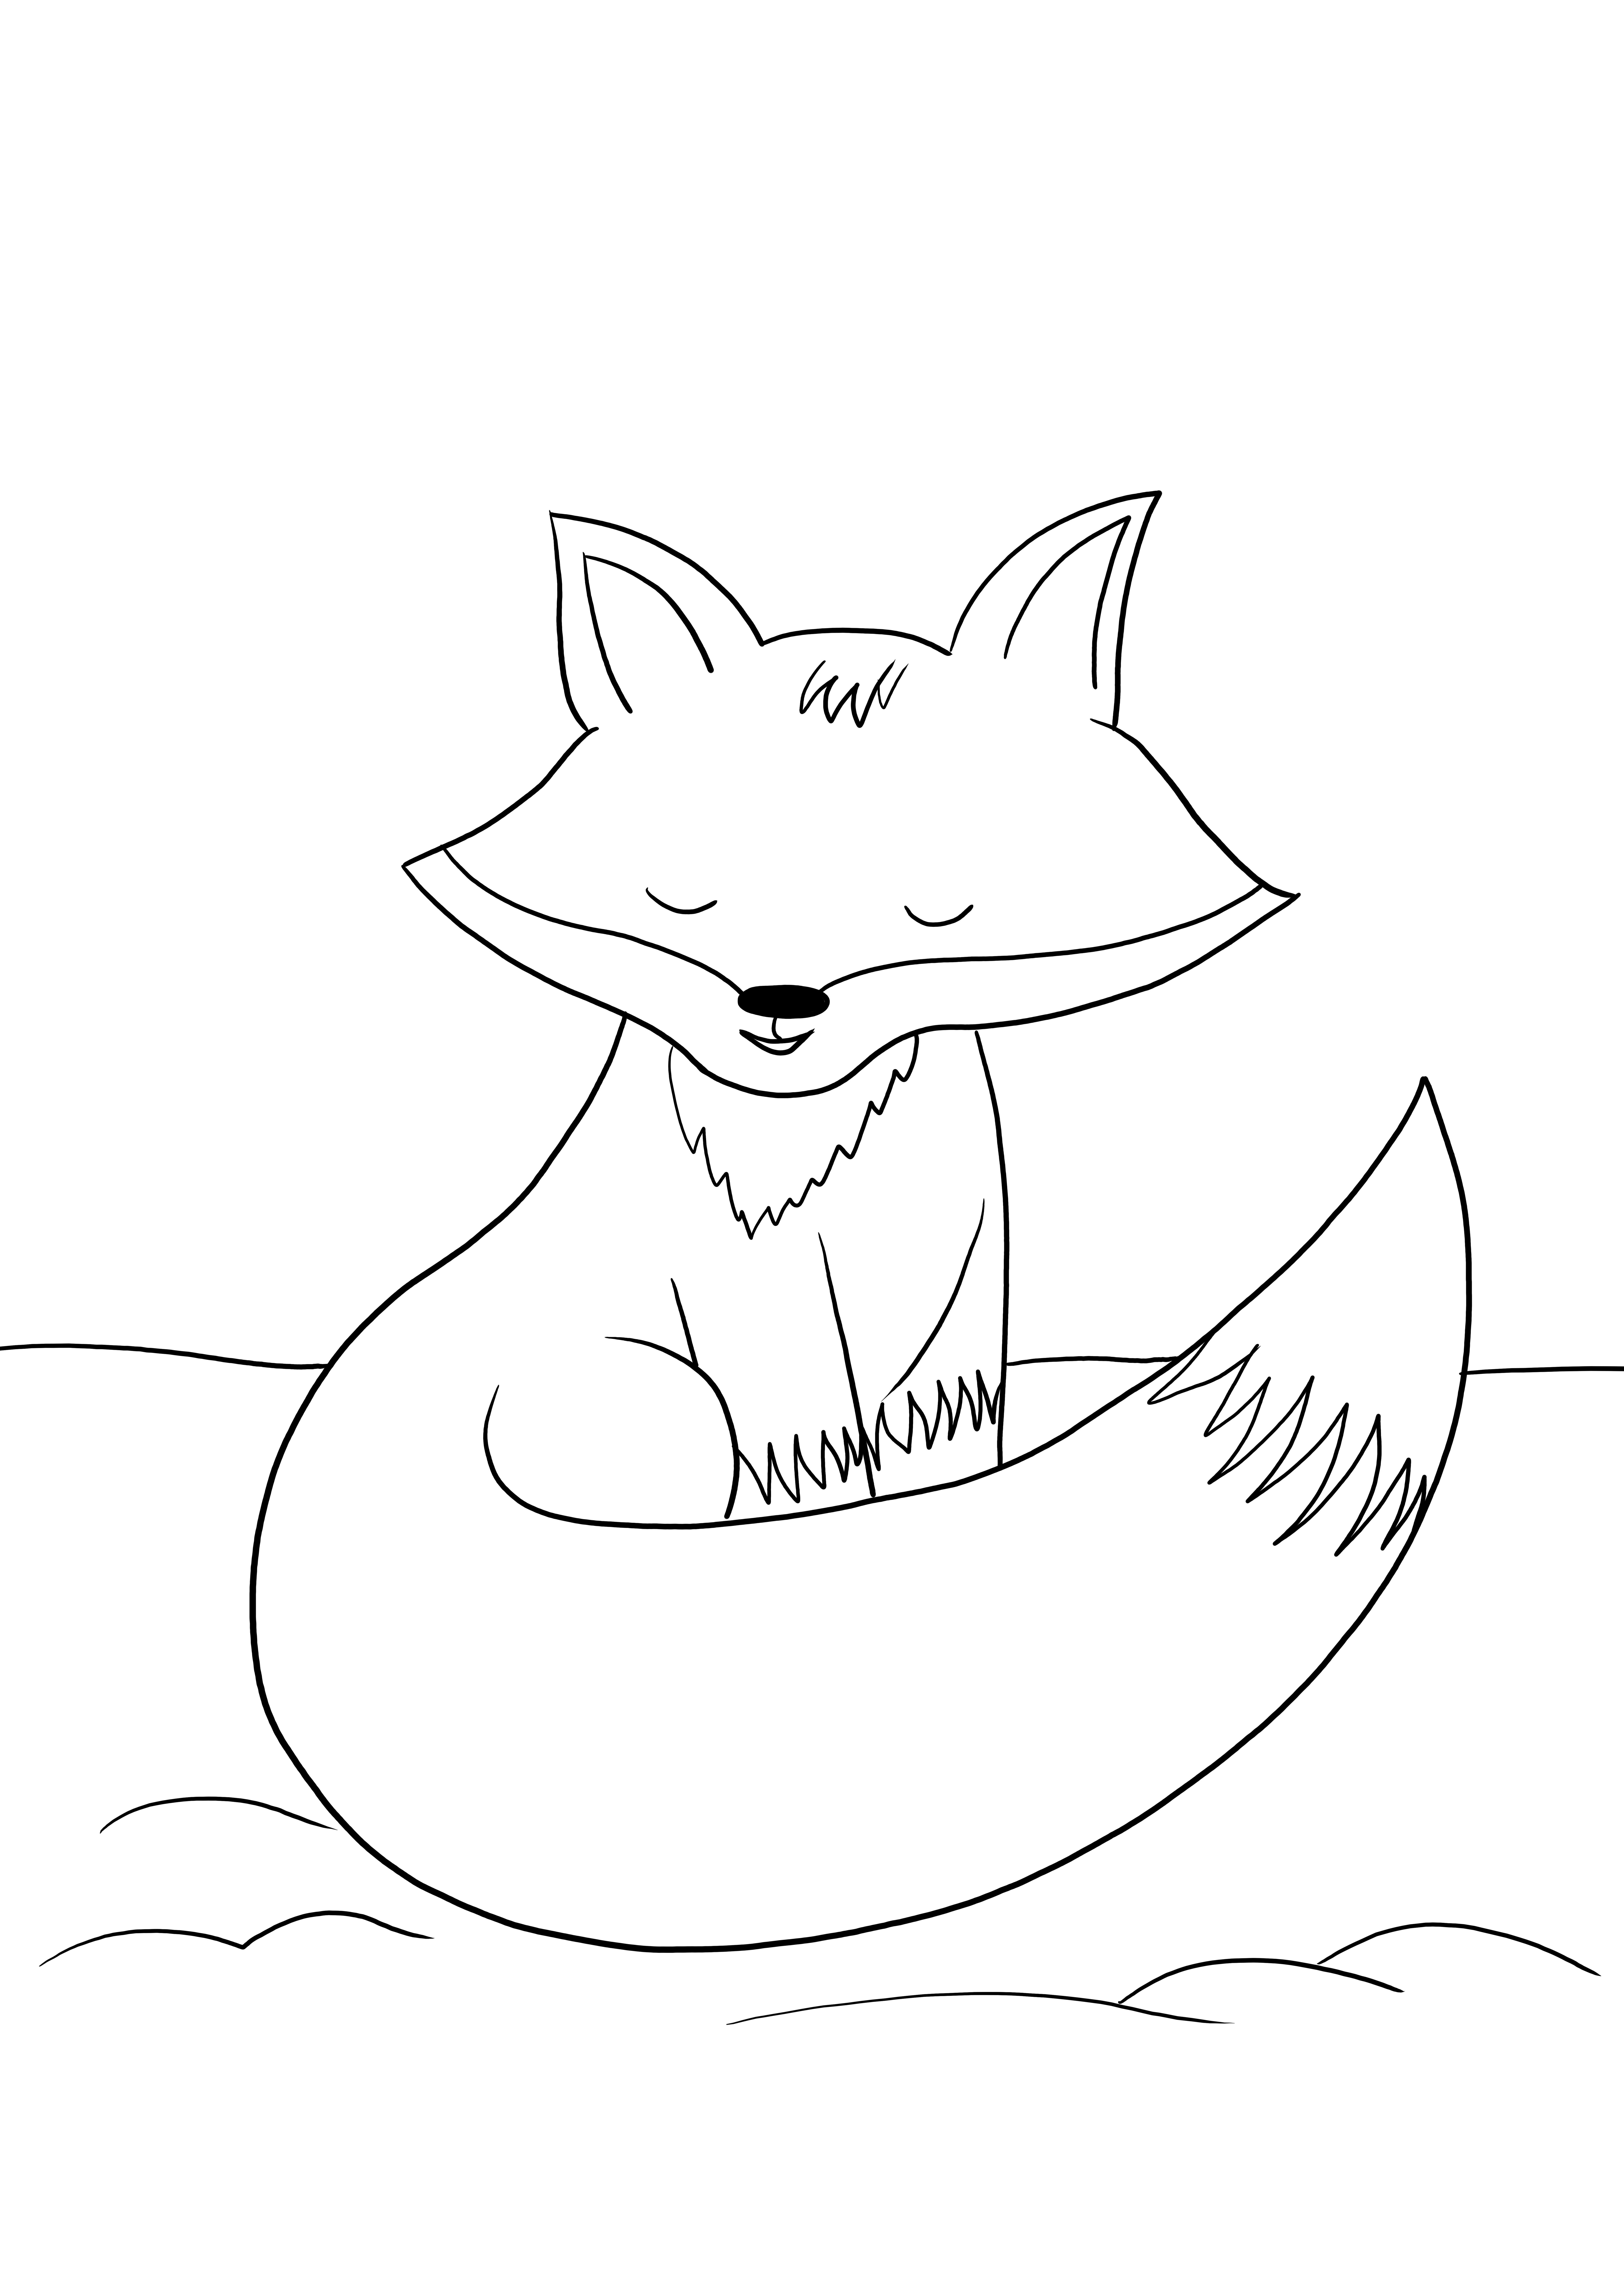 A simple coloring sheet of a fox to print for free